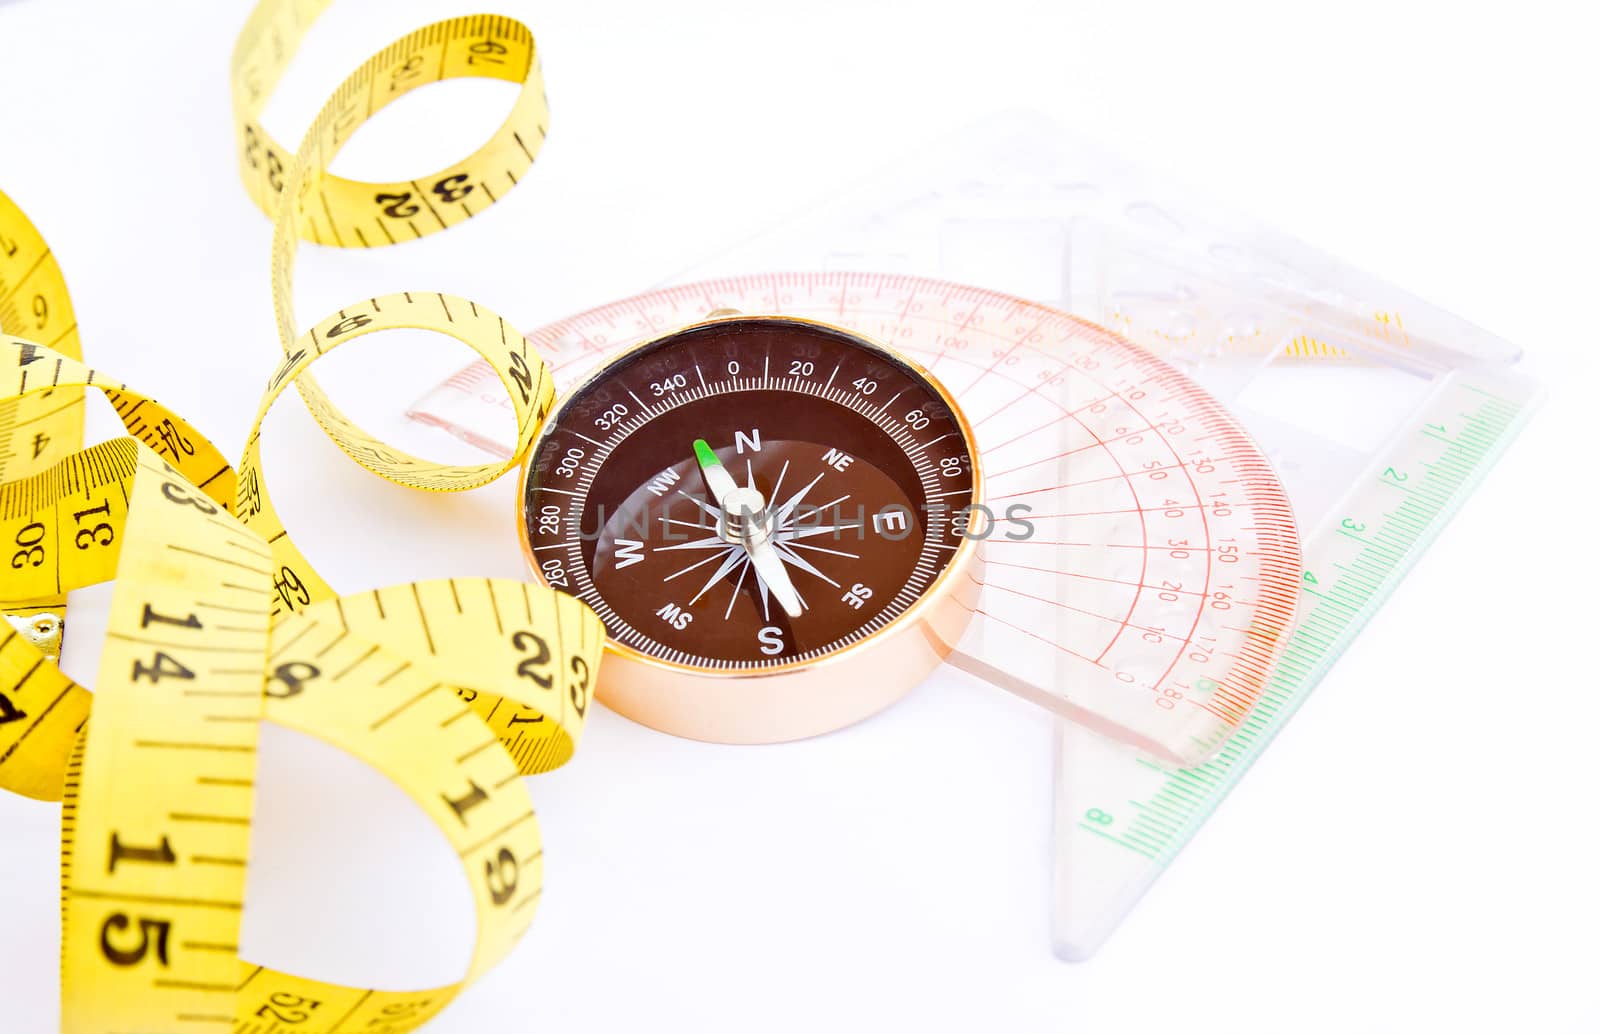 Measure Tape, Compass, ruler on white background